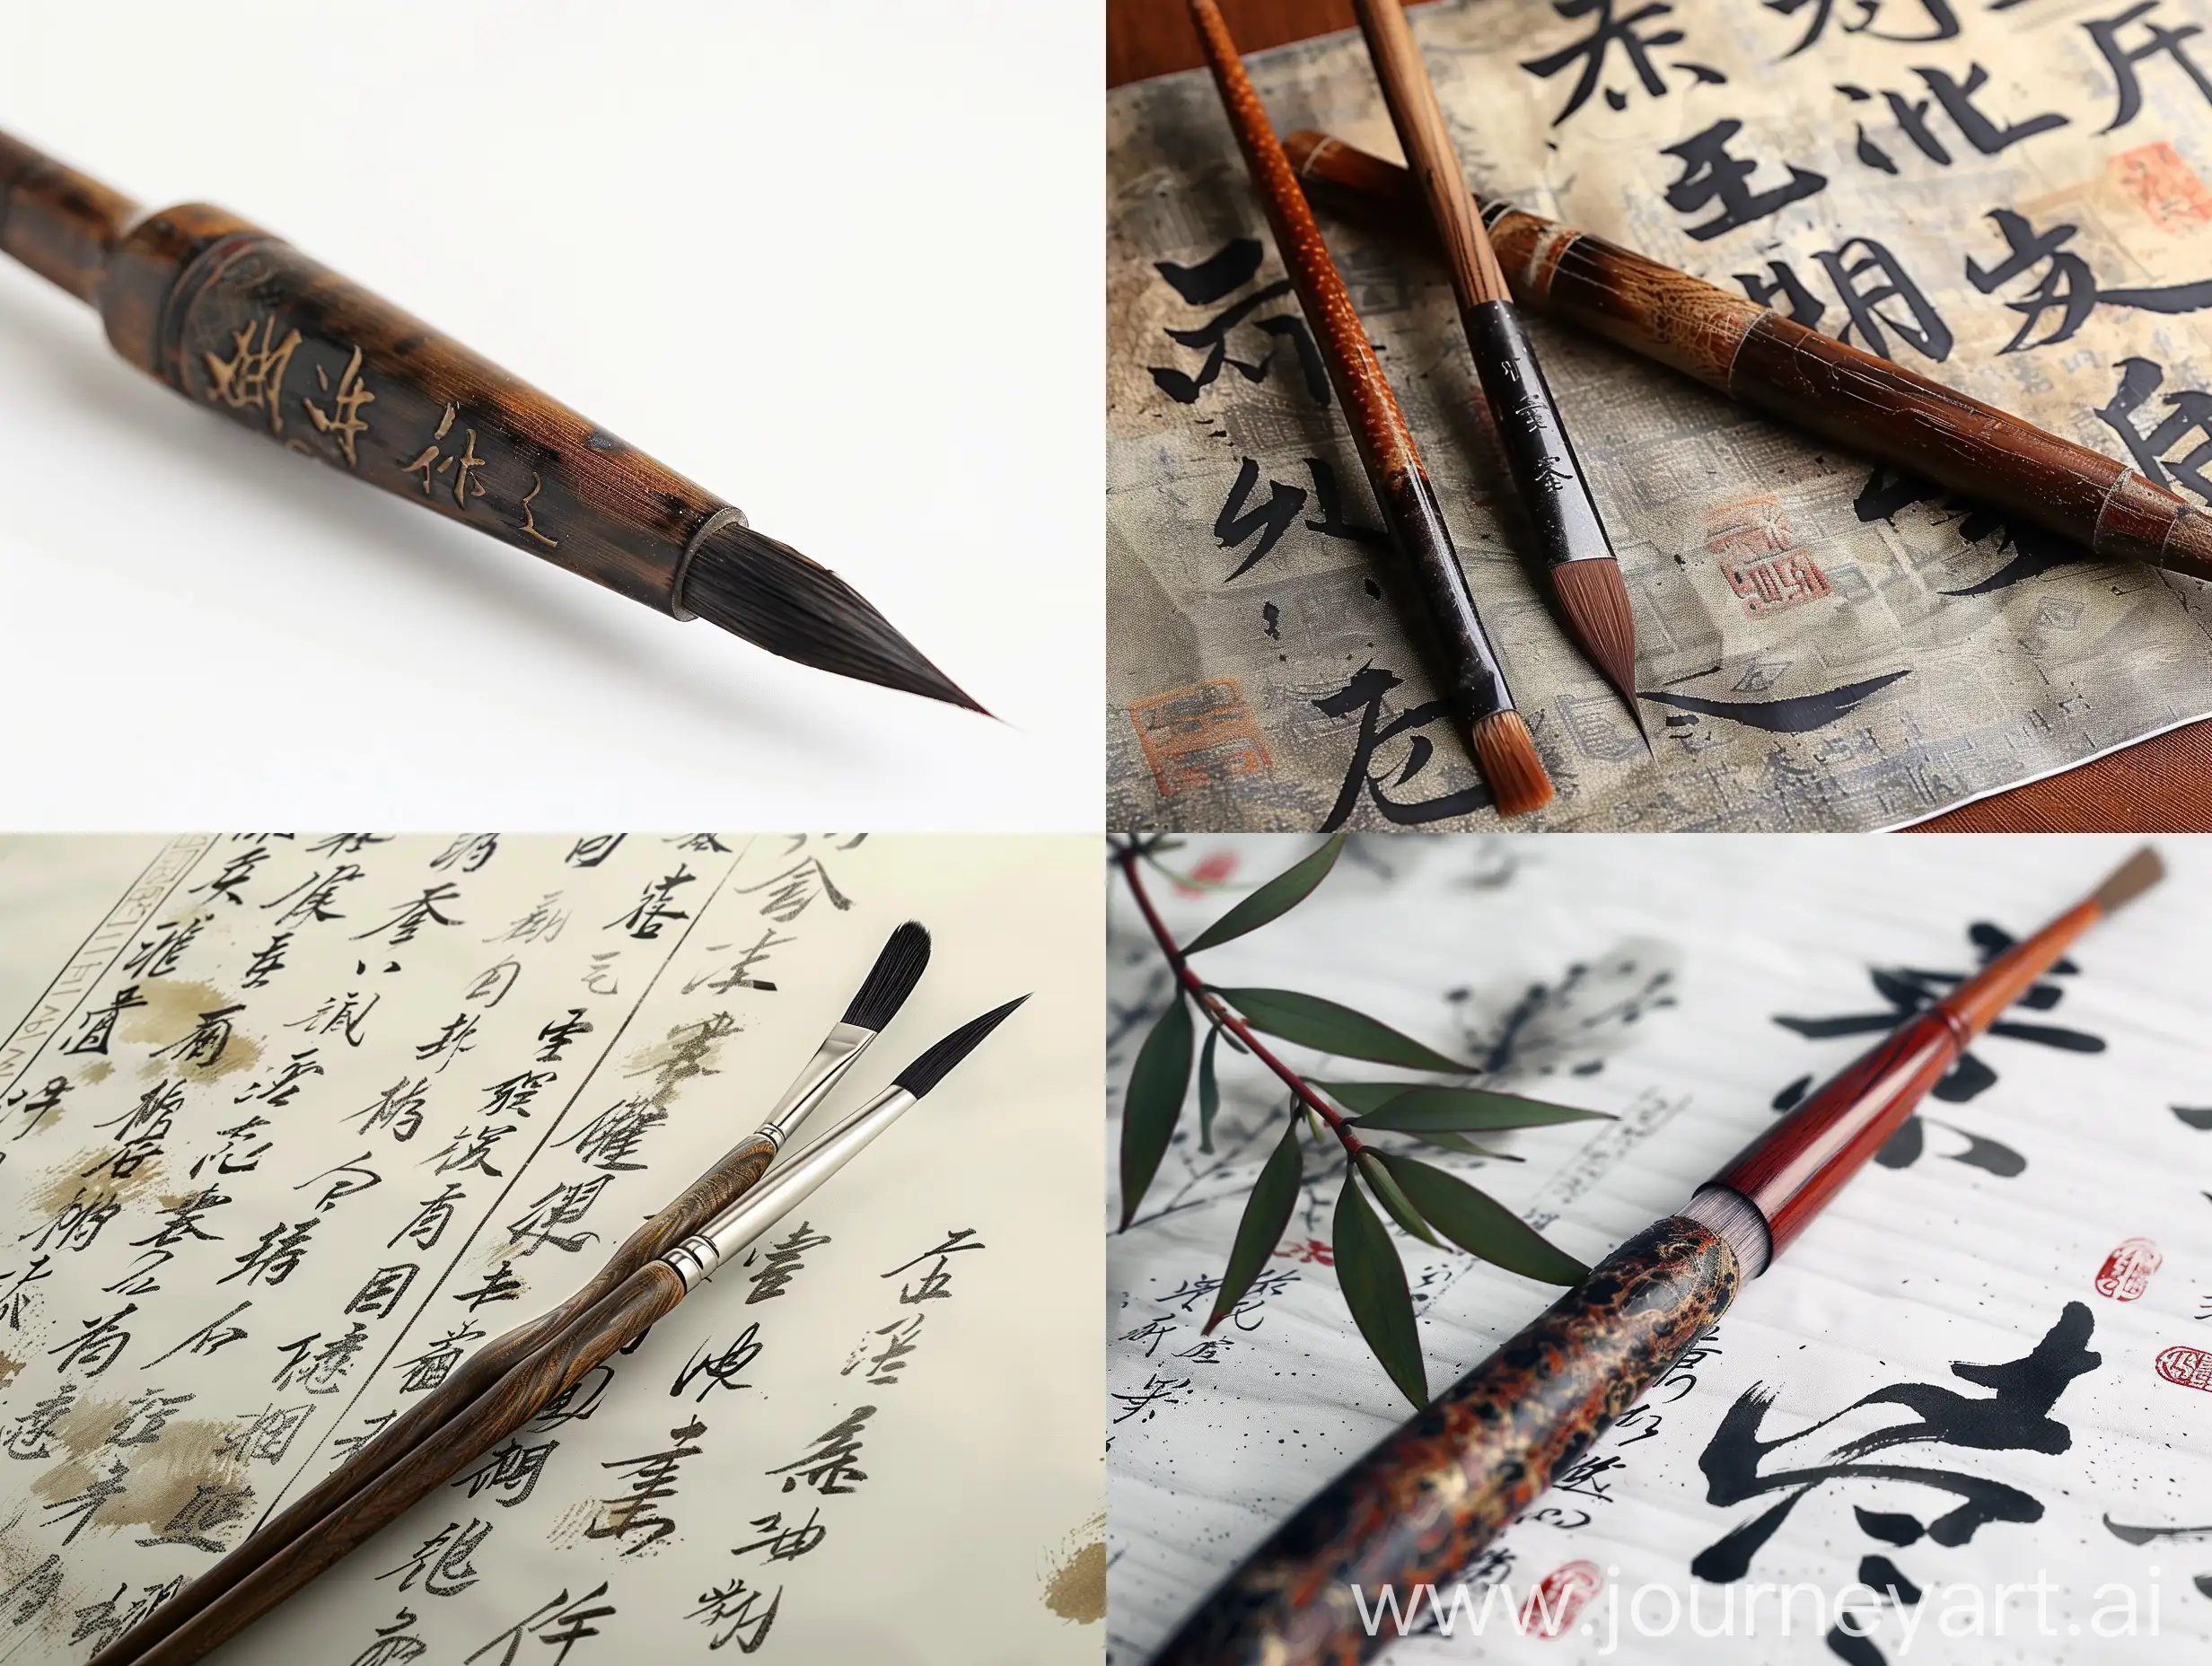 A simple and long brush with Chinese culture